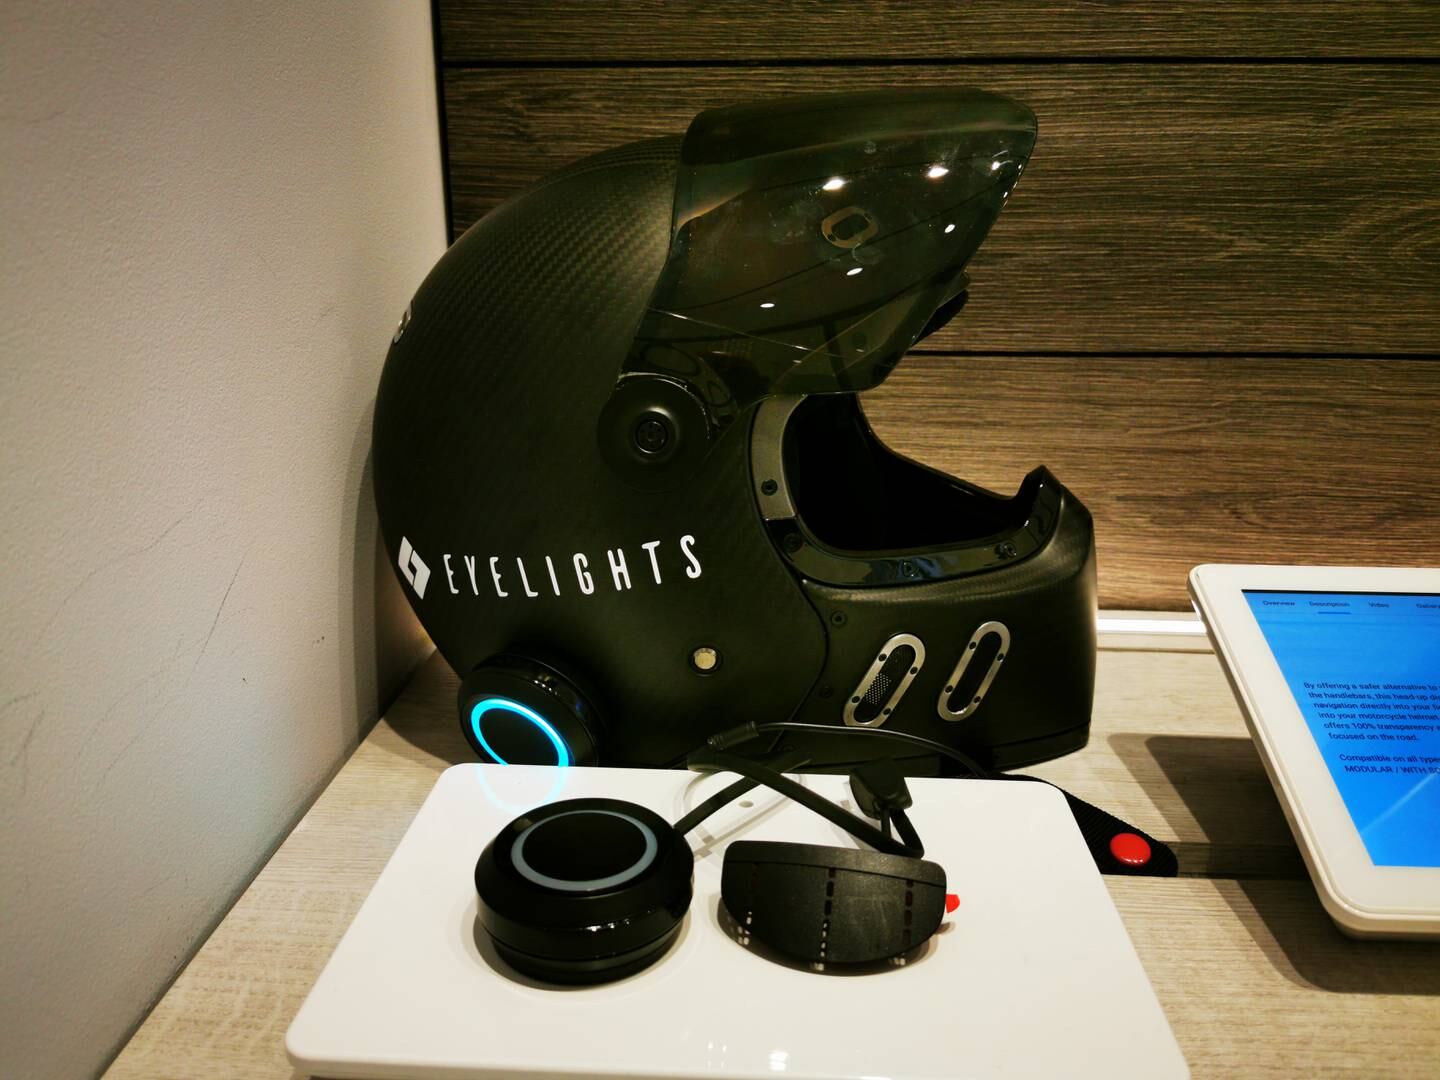 Eyelights, a motorcycle helmet with an integrated GPS and a heads-up display. Courtesy b8ta / Business France